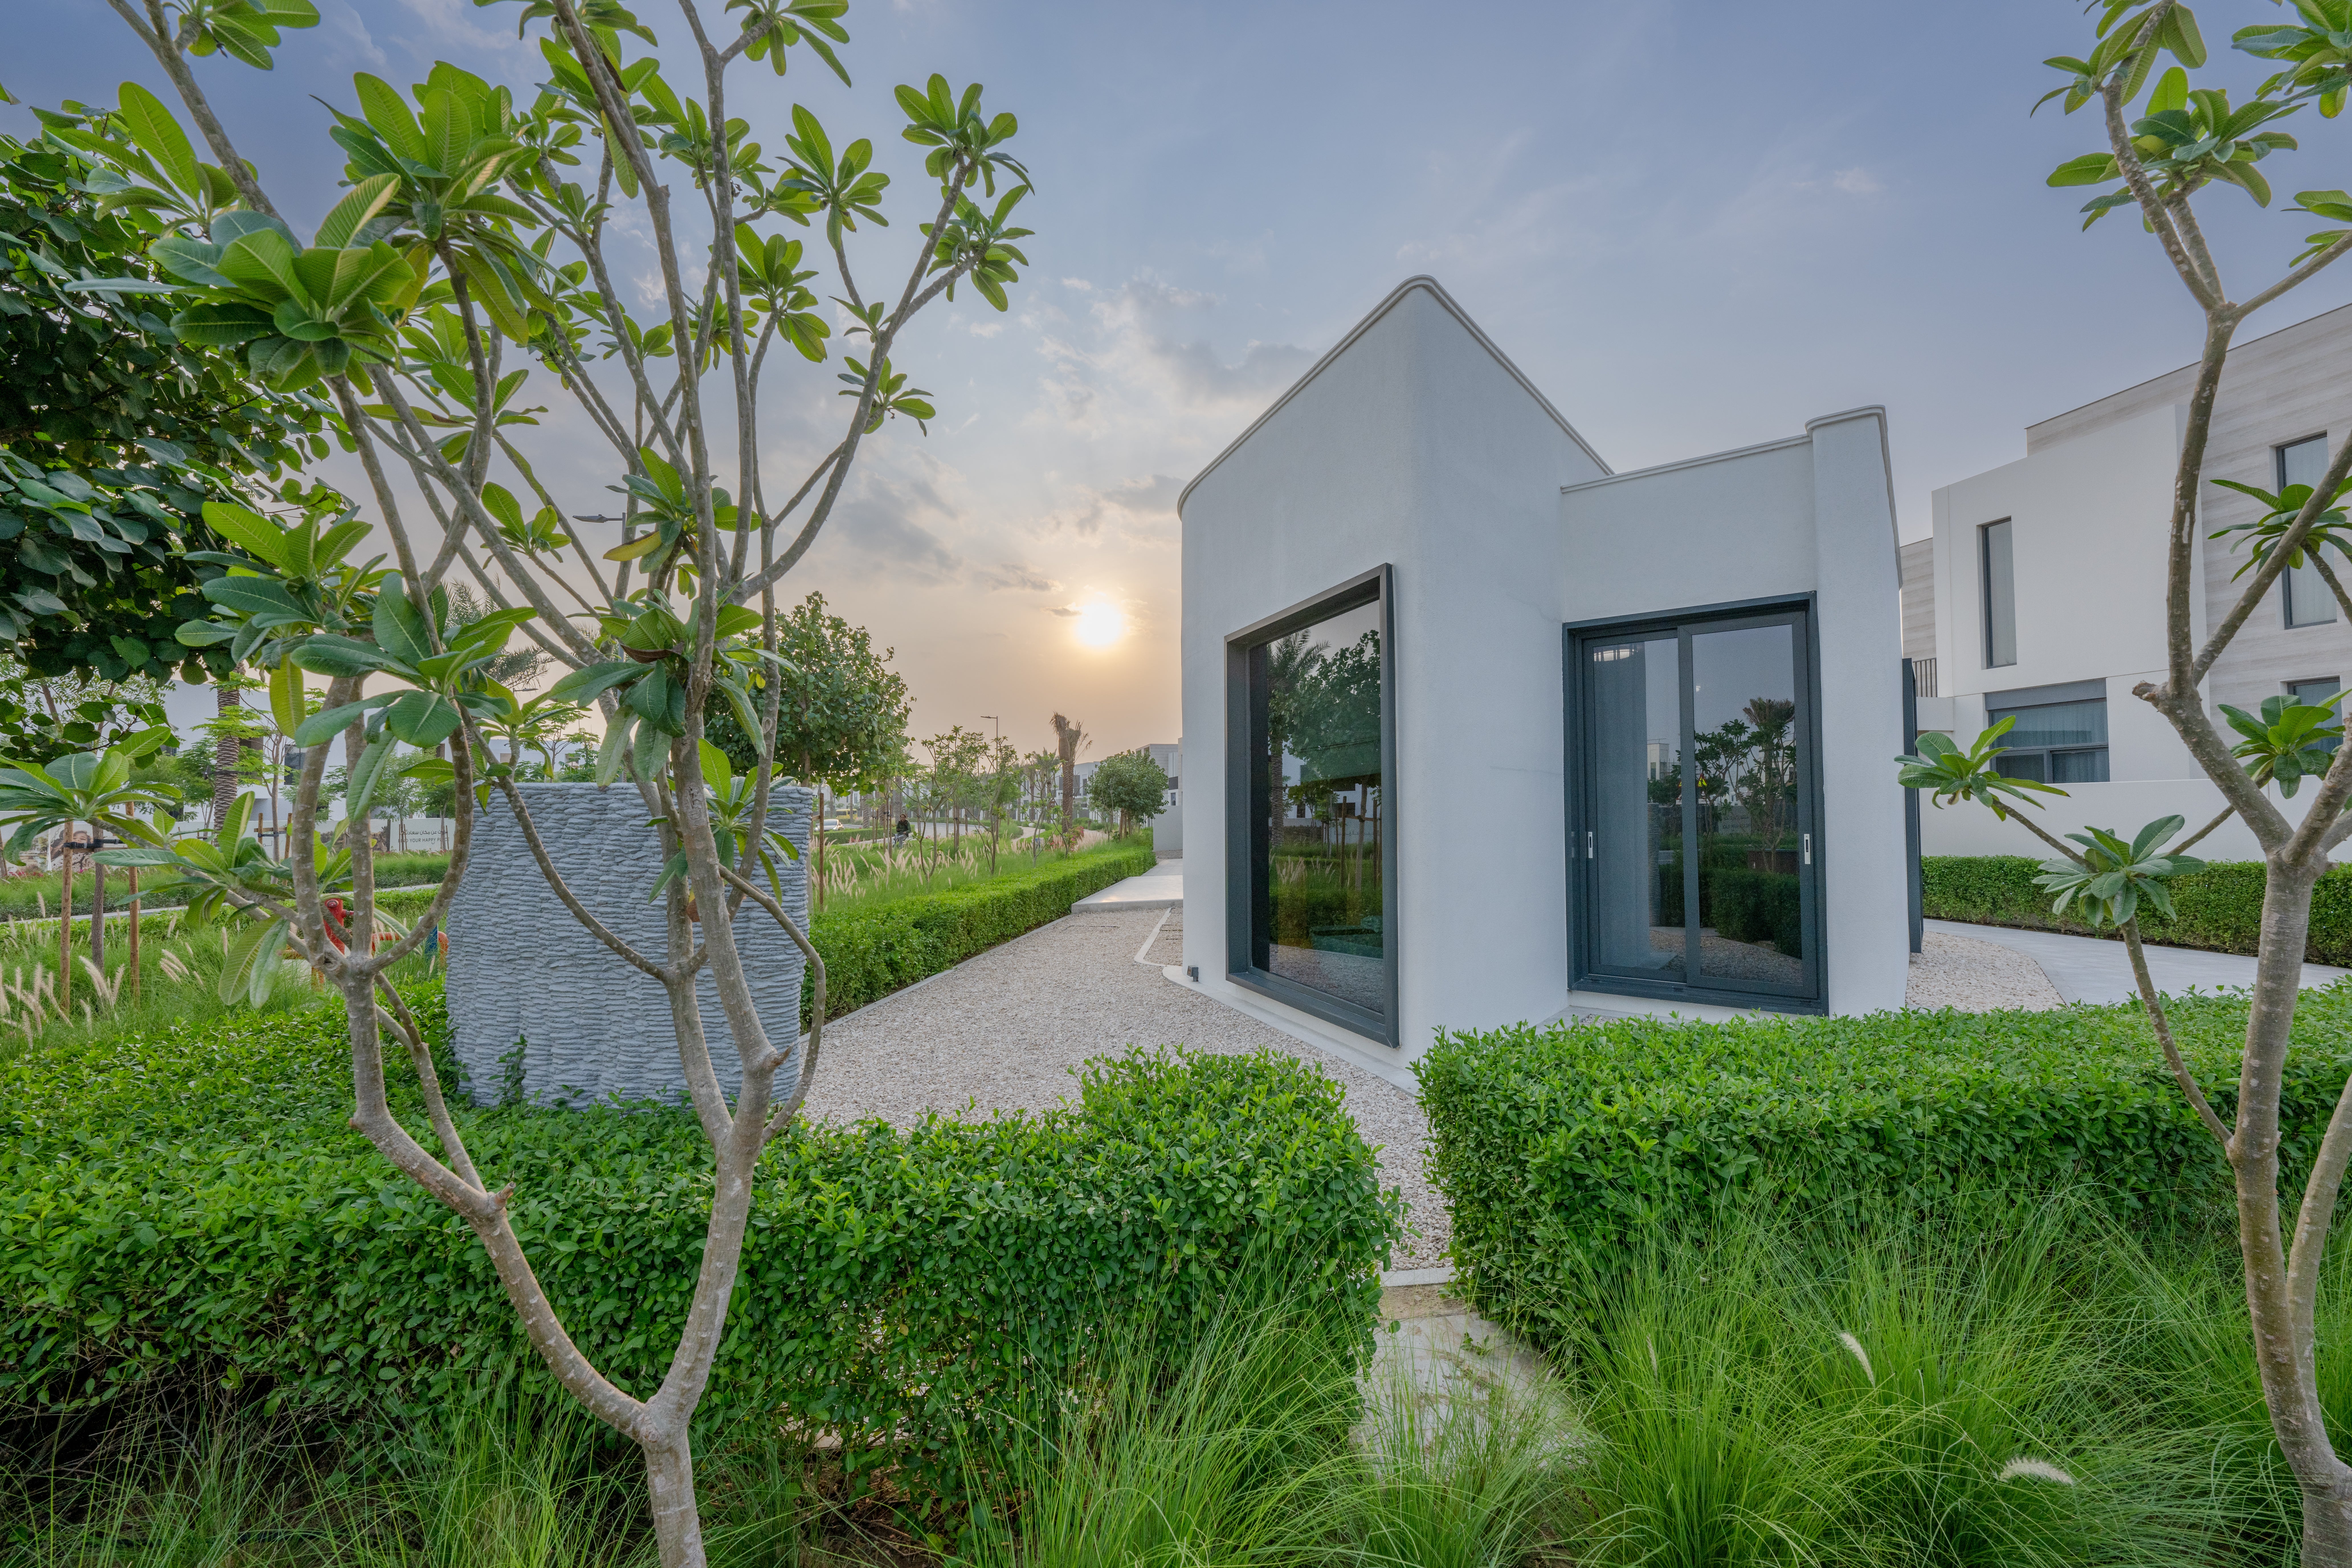 Emaar’s 3D printed villa contains many interesting design features, including the use of curved walls only possible with 3D construction printing